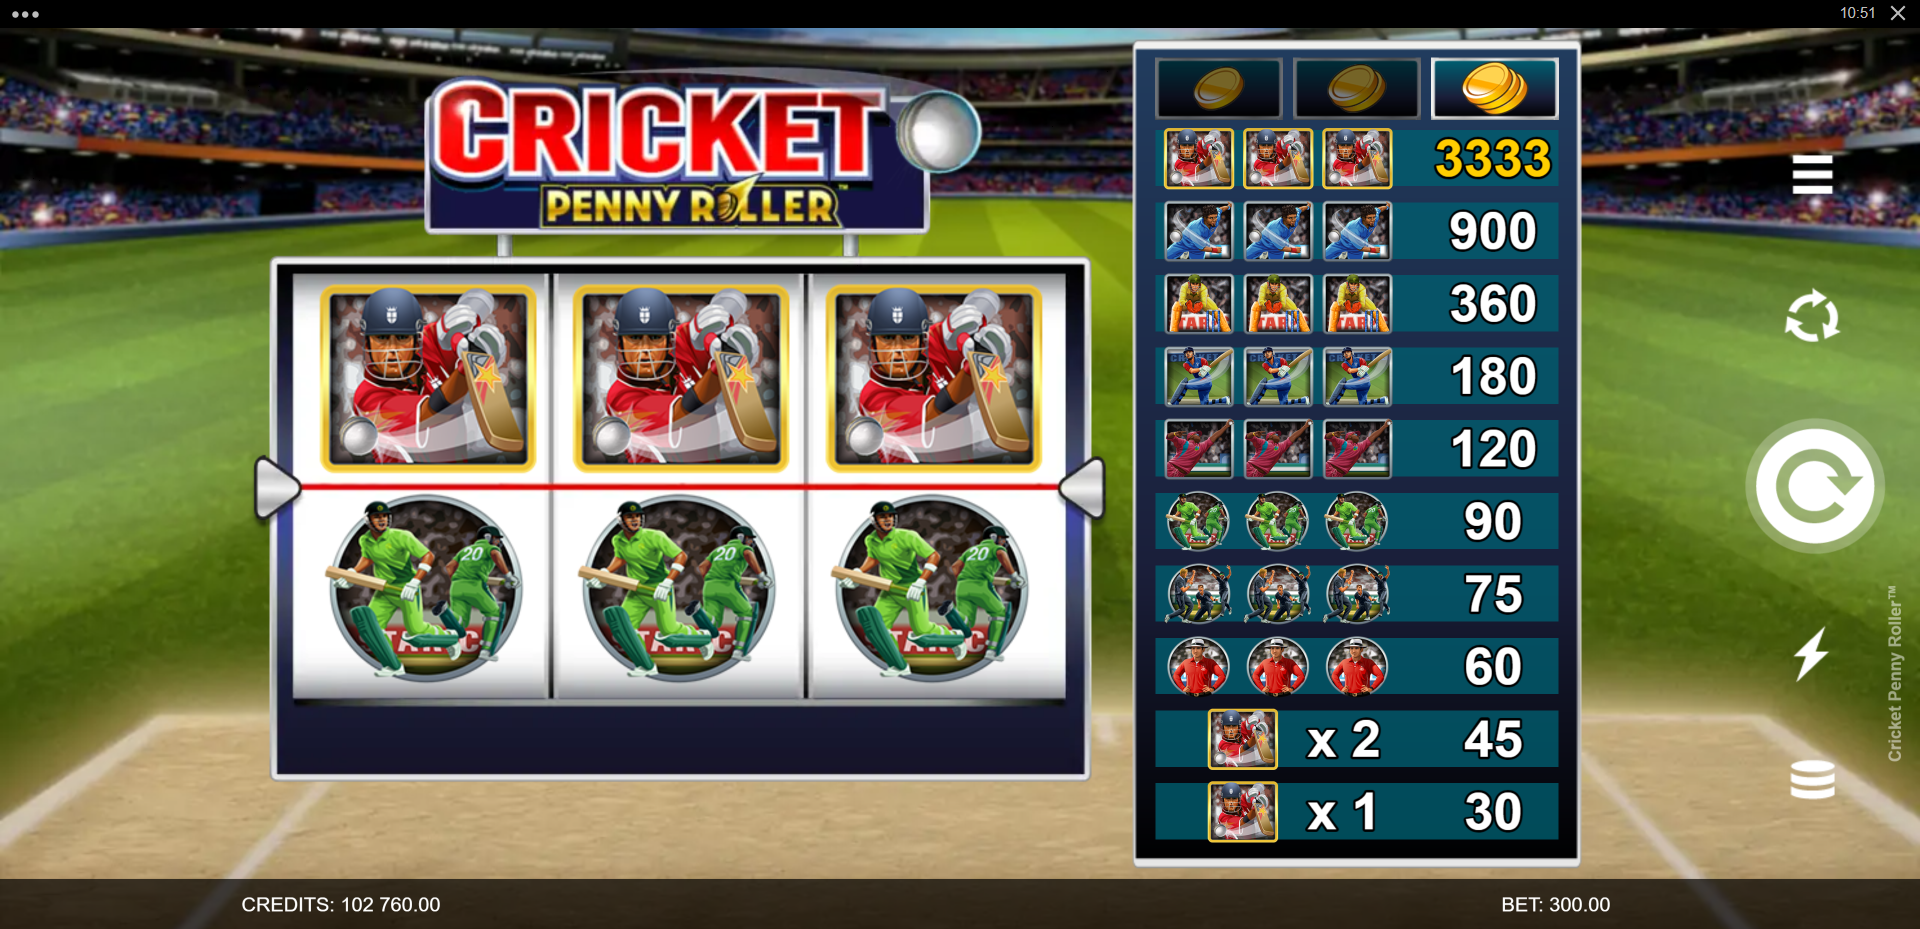 Cricket Penny Roller Slot features